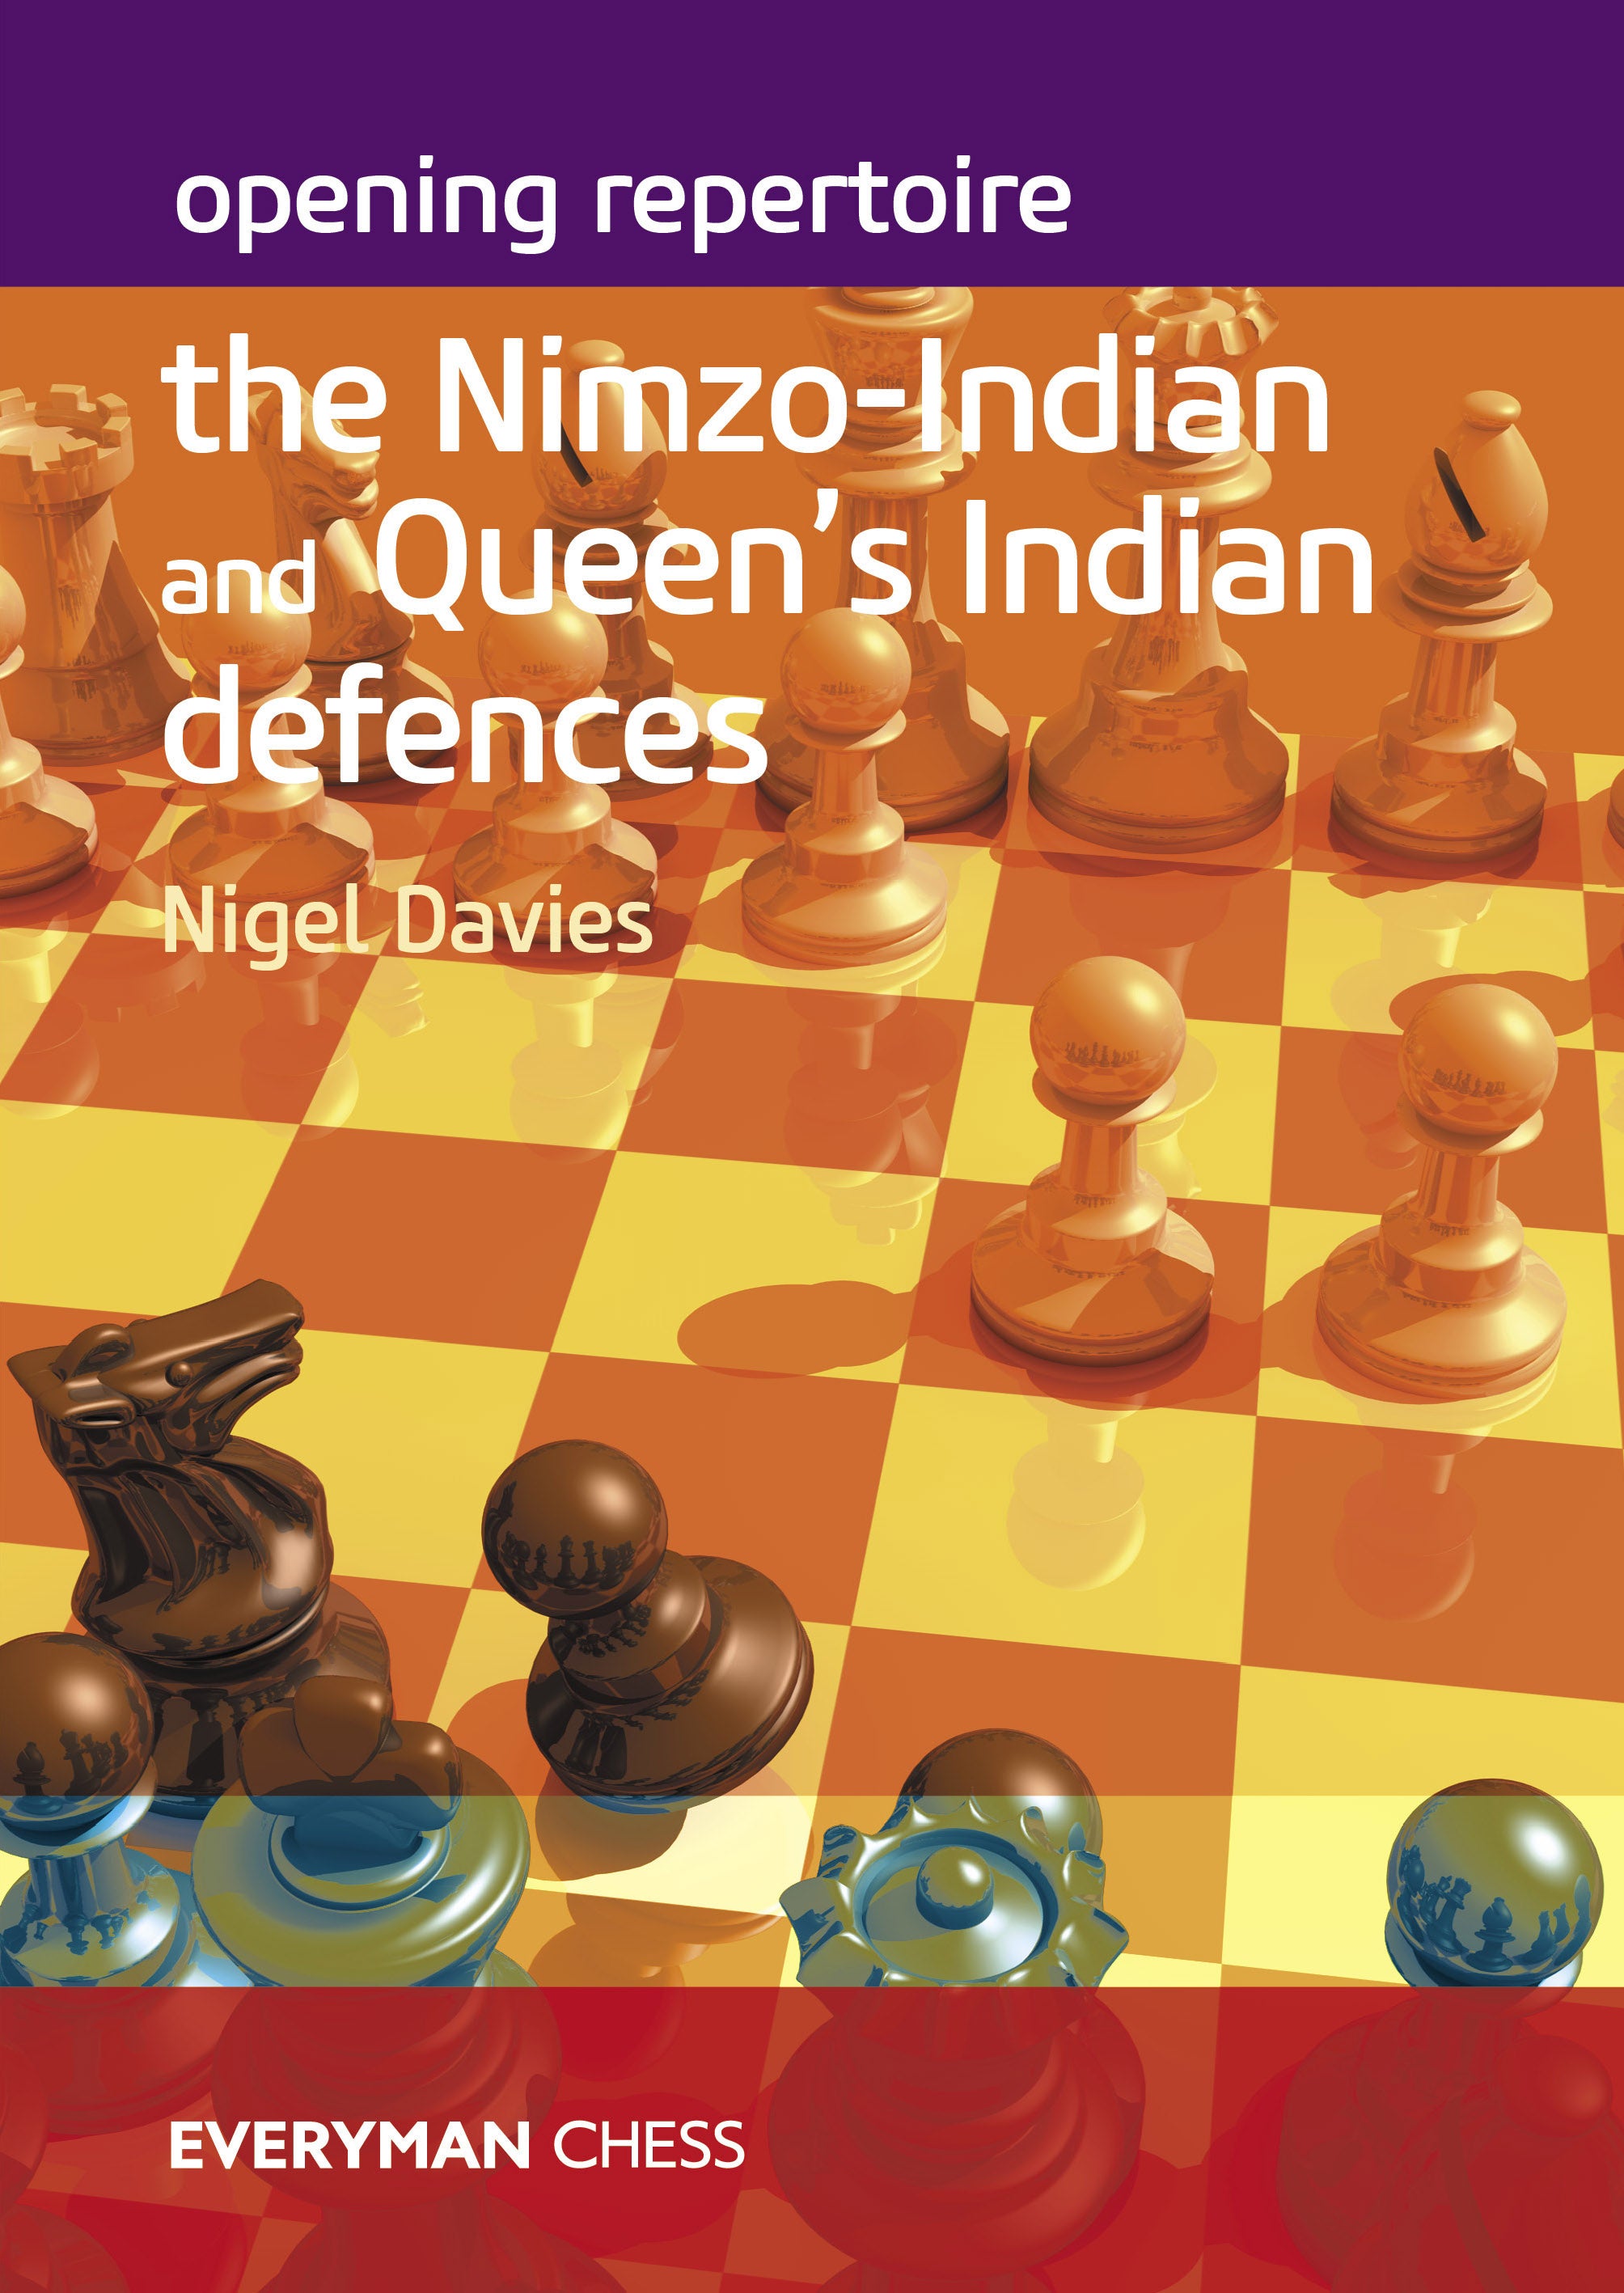 The Classical Sicilian Defense - Chess Opening Trainer on DVD